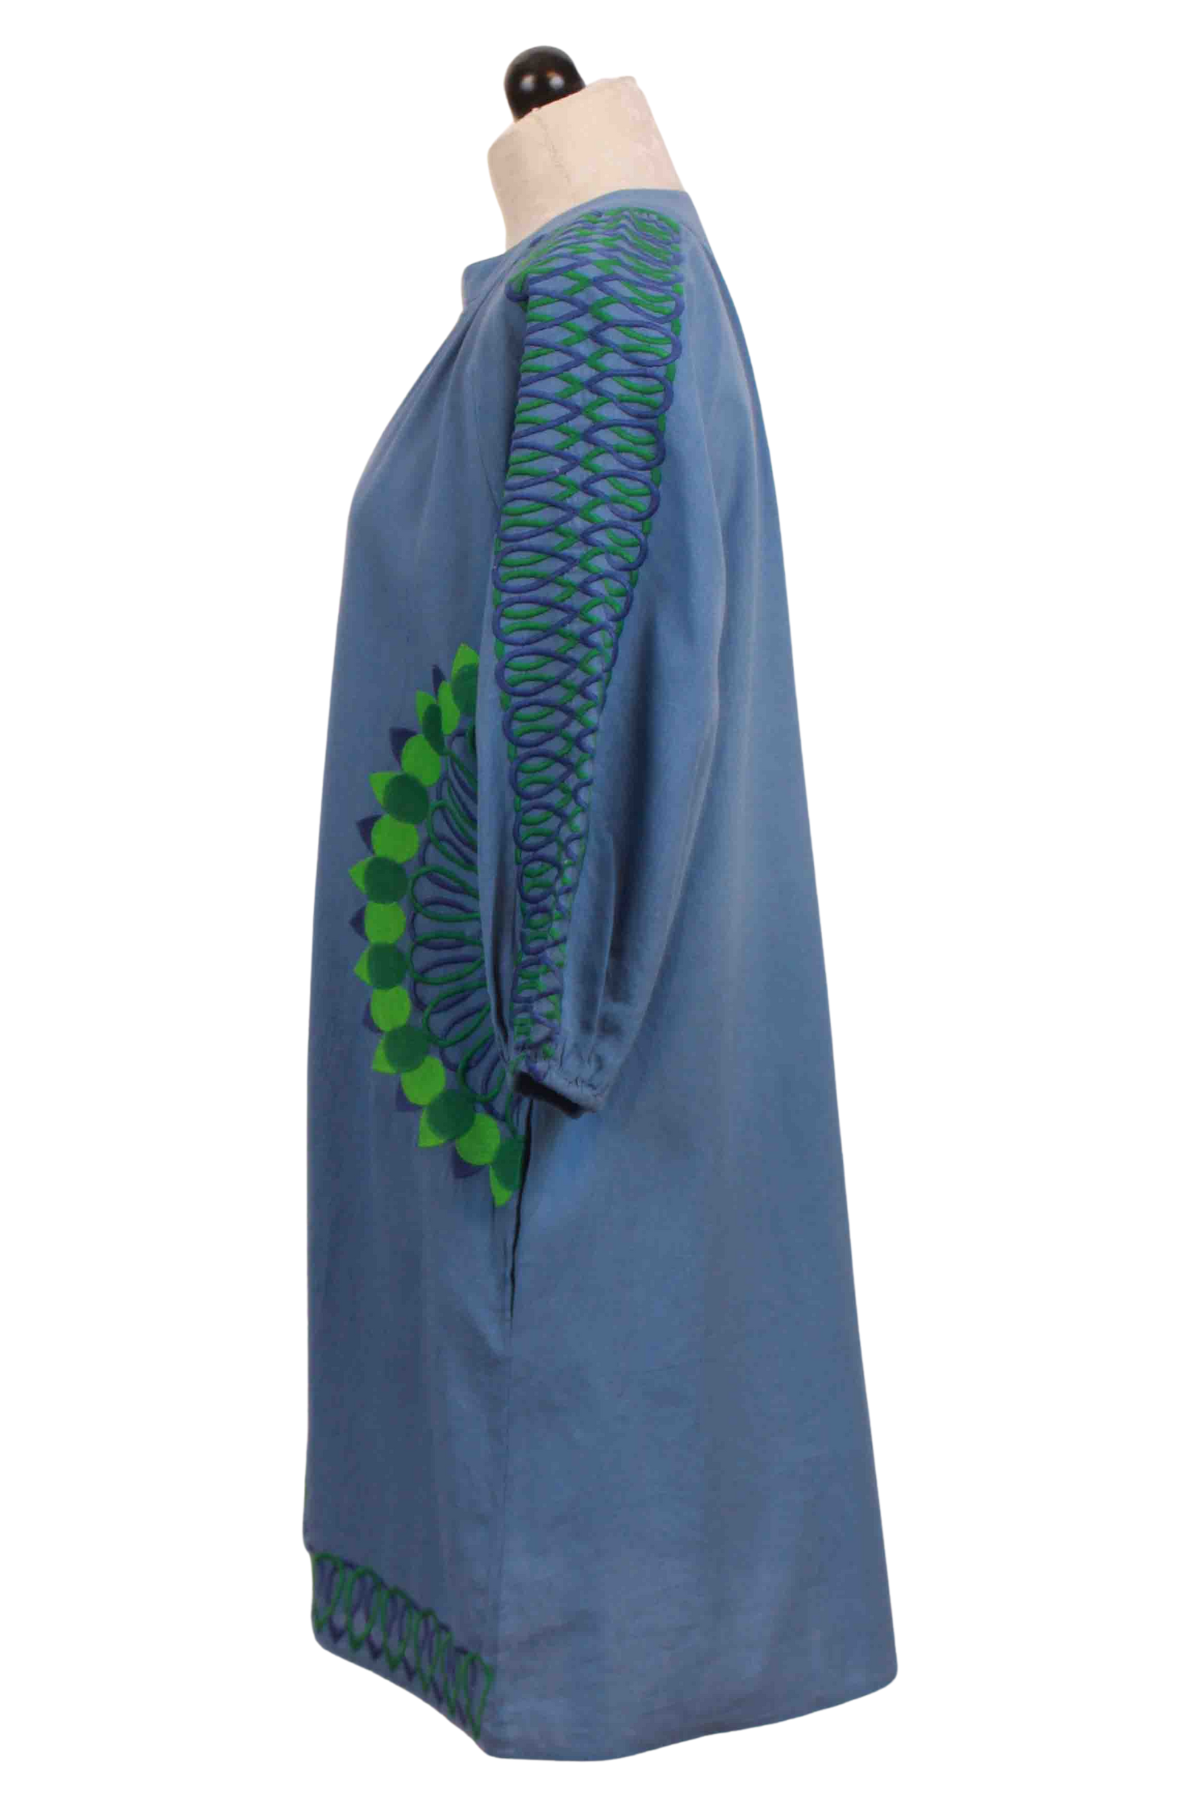 side view of Blue/Green Hailey Embroidered Dress by Valerie Khalfon